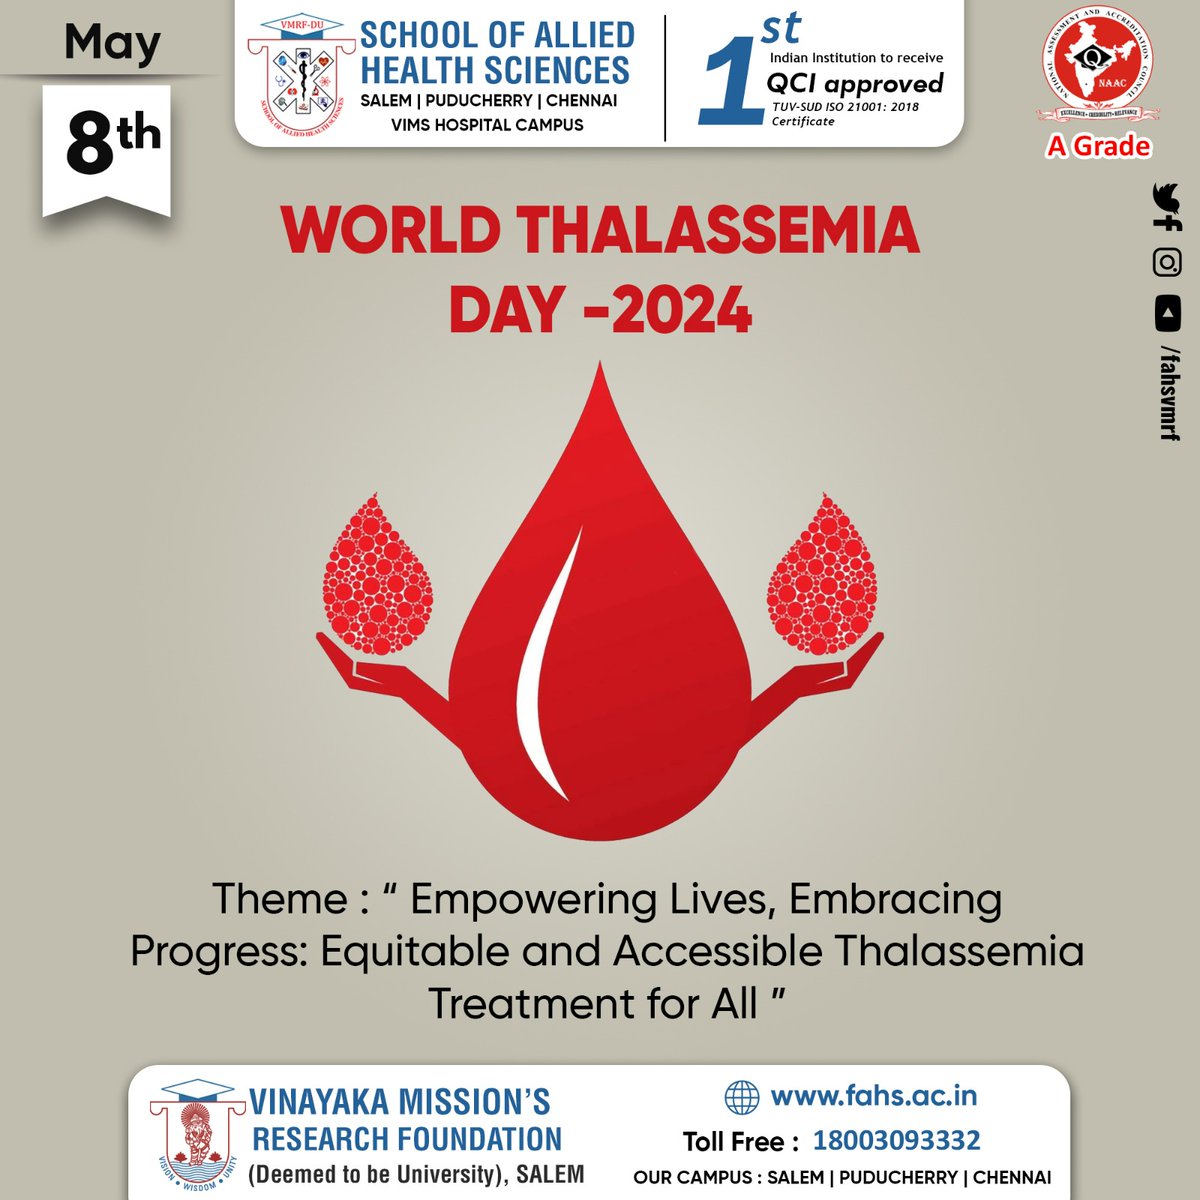 World Thalassaemia Day, observed on May 8th every year, is dedicated to raising awareness about thalassaemia, a genetic blood disorder characterised by abnormal haemoglobin production. 

#WorldThalassemiaDay #raiseawareness